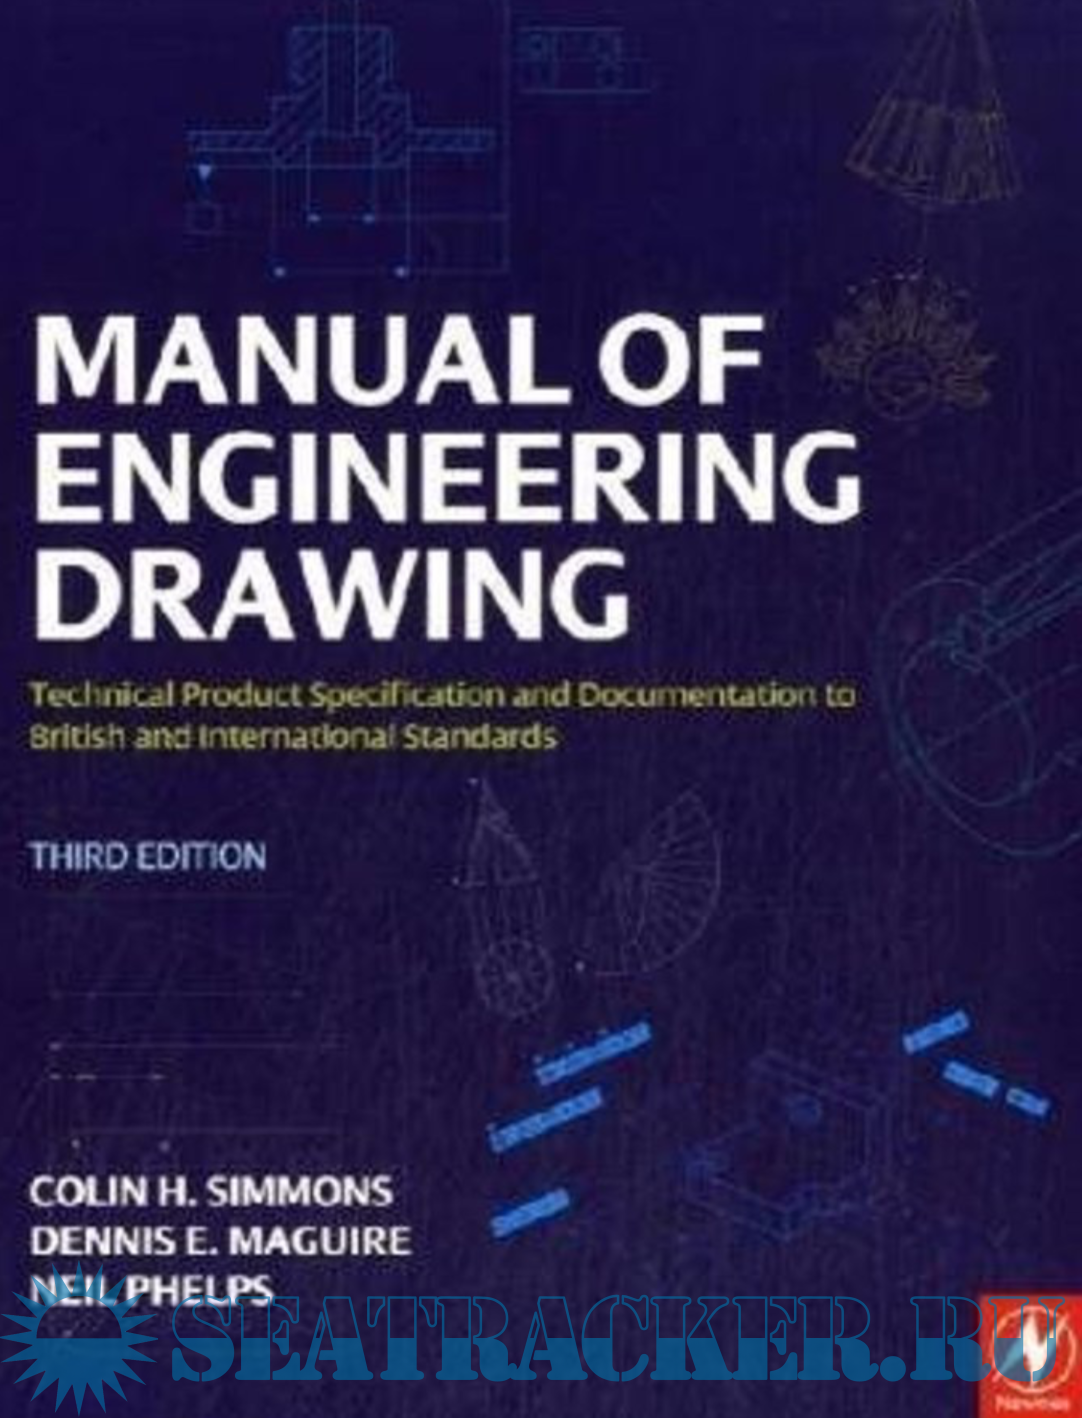 Thoughts on this book? : r/ChemicalEngineering